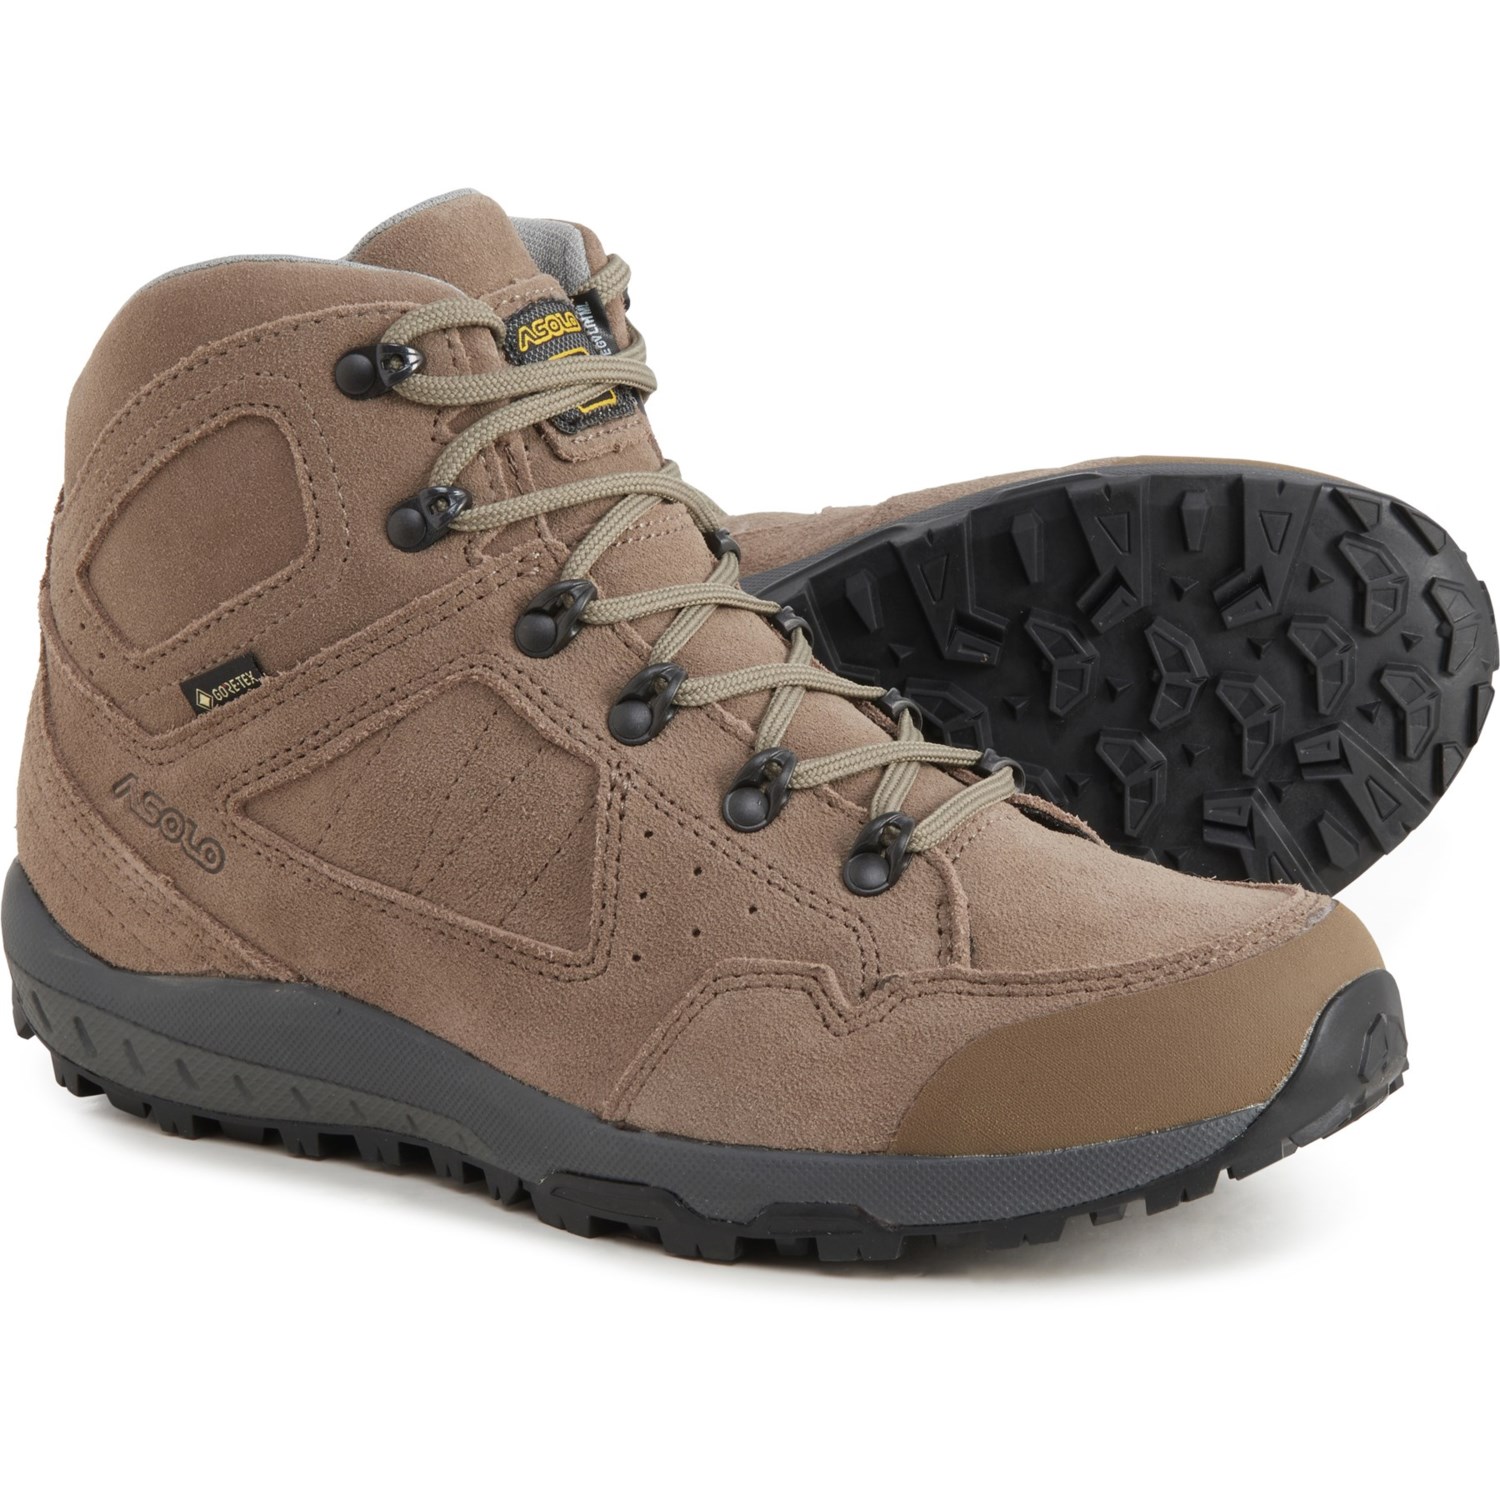 Asolo Landscape GV Gore-Tex Hiking Boots - Waterproof, Leather (For Women)